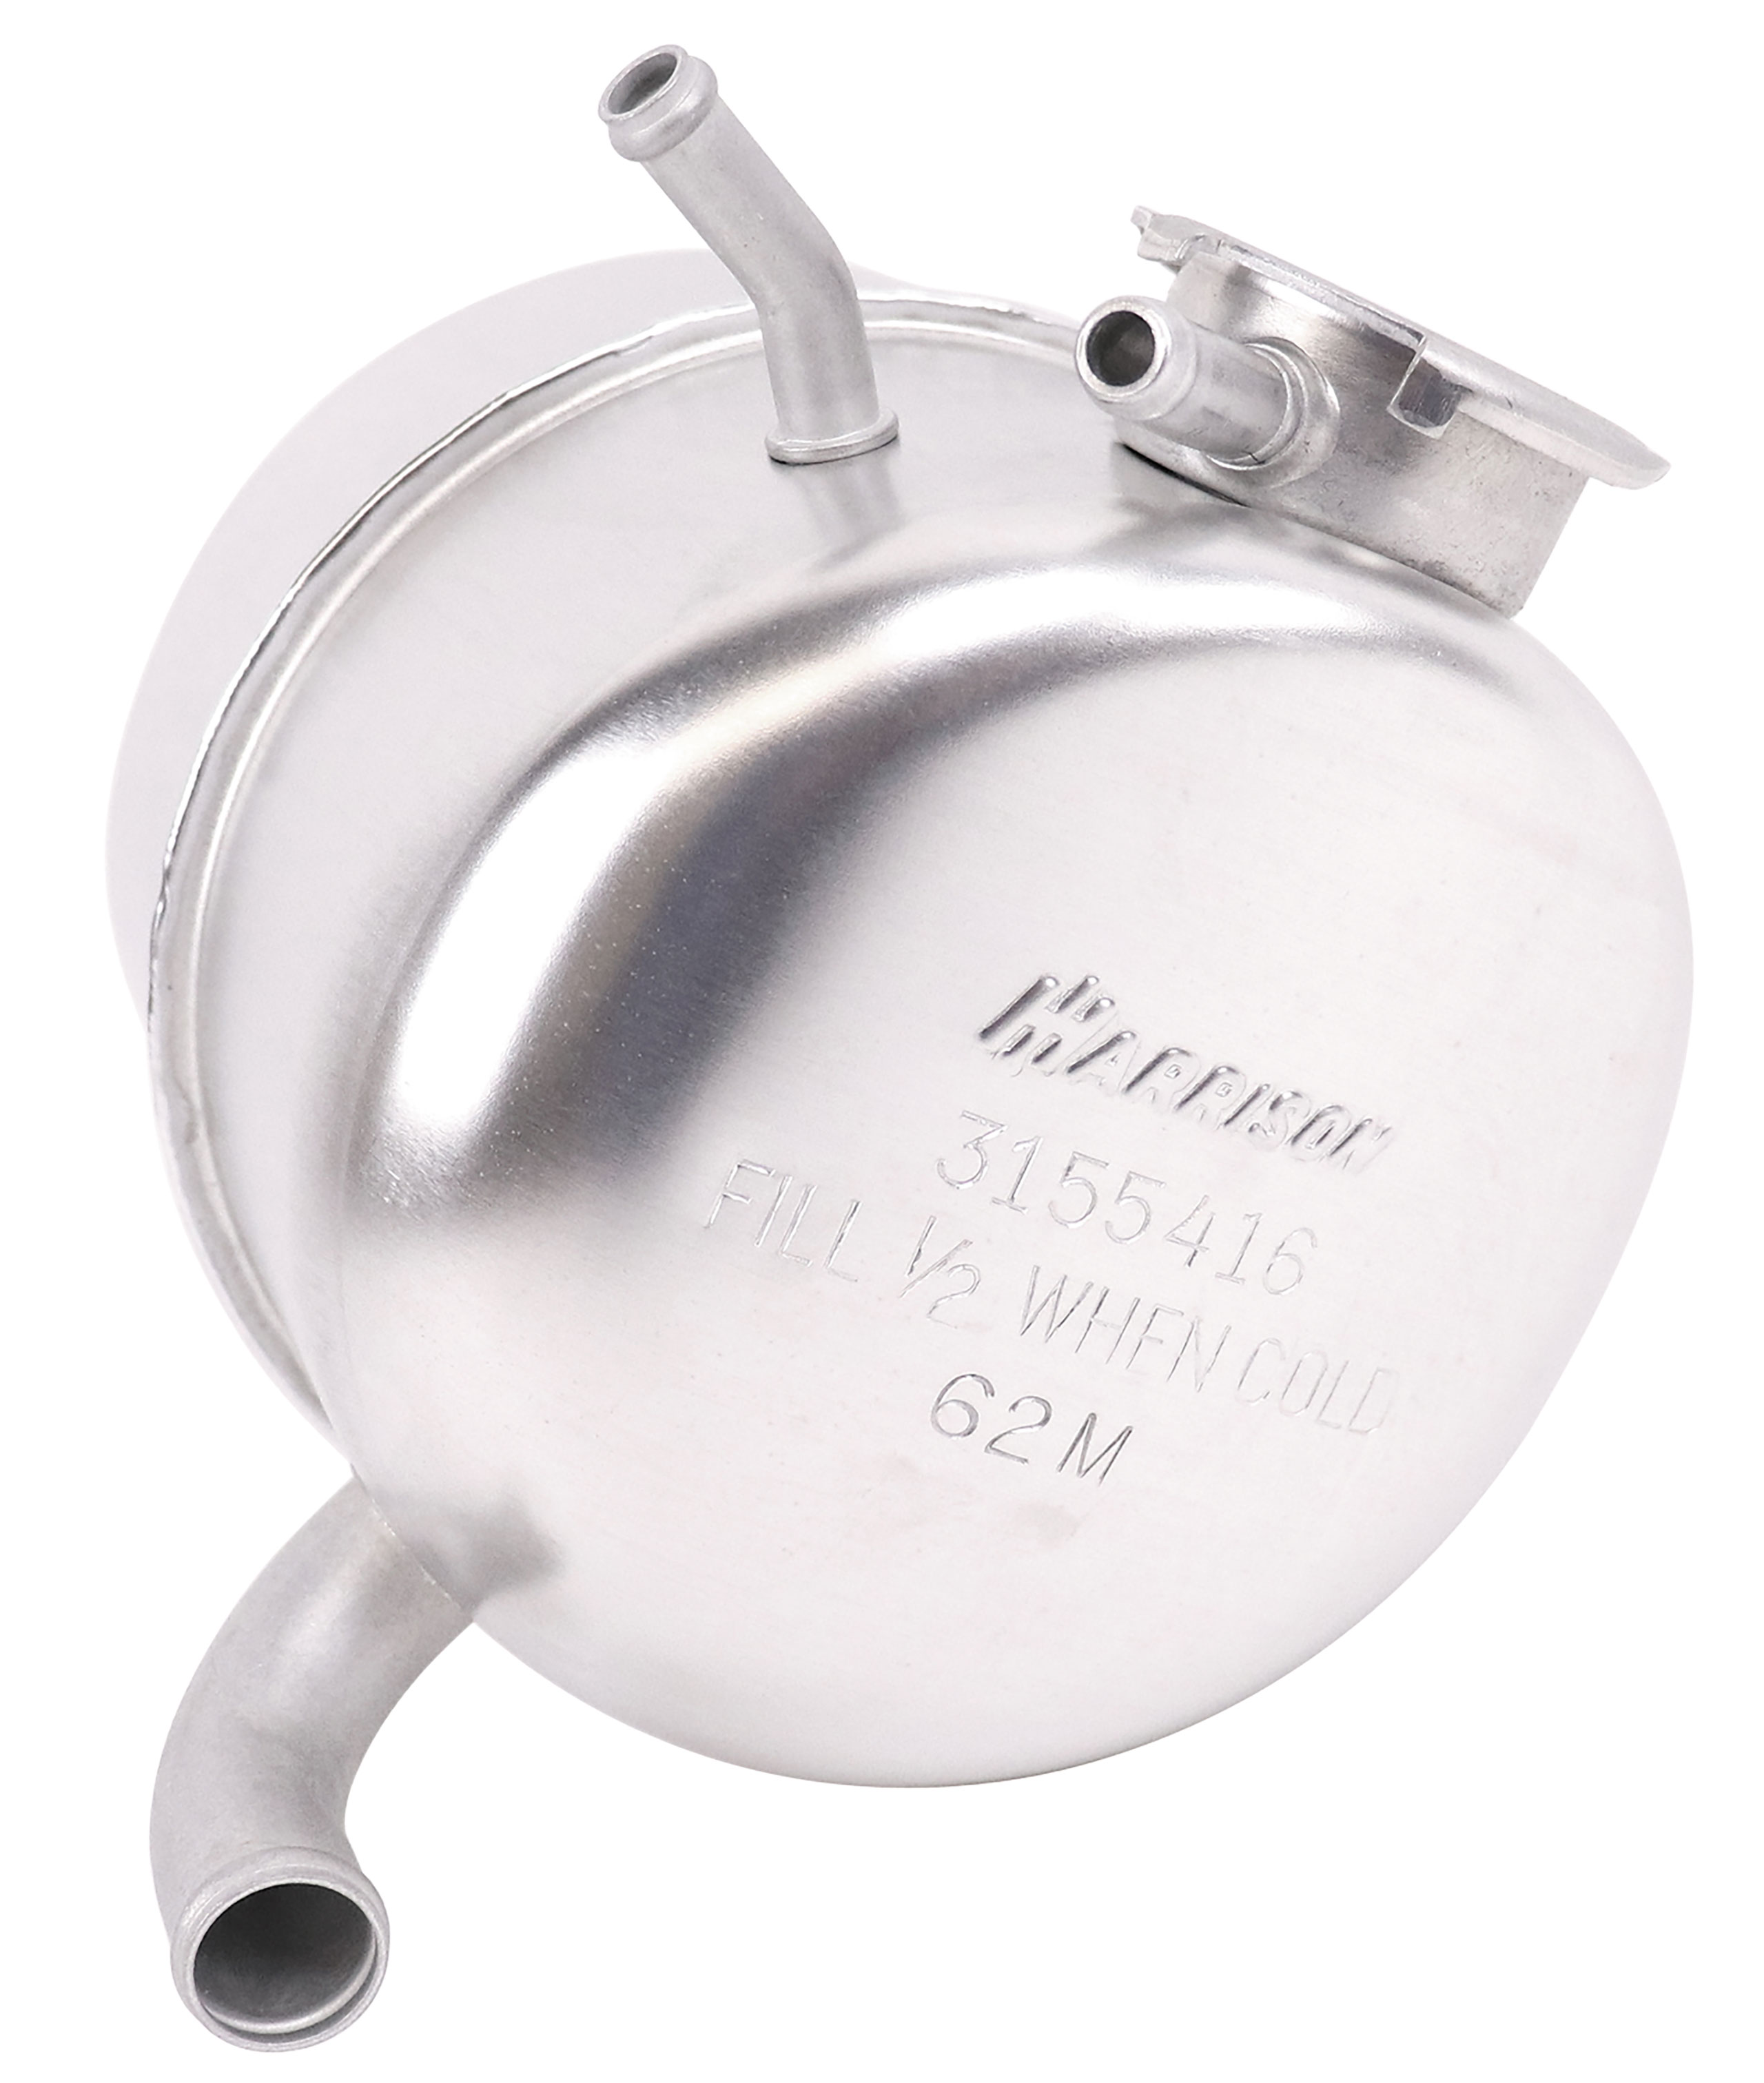 C2 1963-1964 Chevrolet Corvette Coolant Expansion Tank With Factory Date Stamp. - DeWitts Radiator